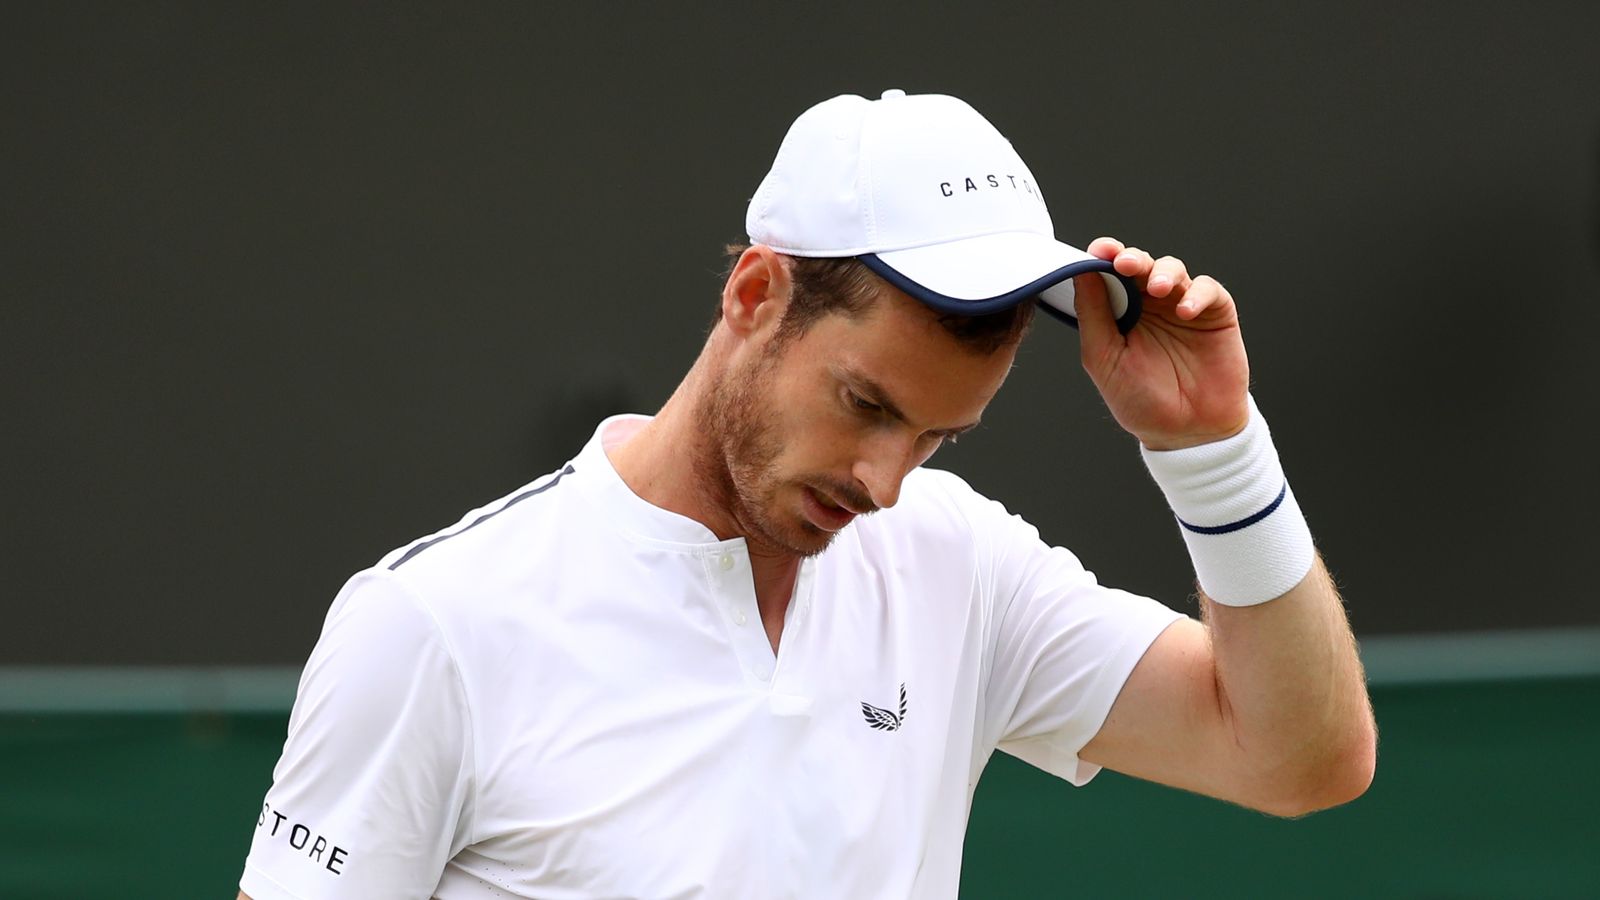 Andy Murray and Pierre-Hugues Herbert lose in men's doubles at Wimbledon | Tennis News ...1600 x 900